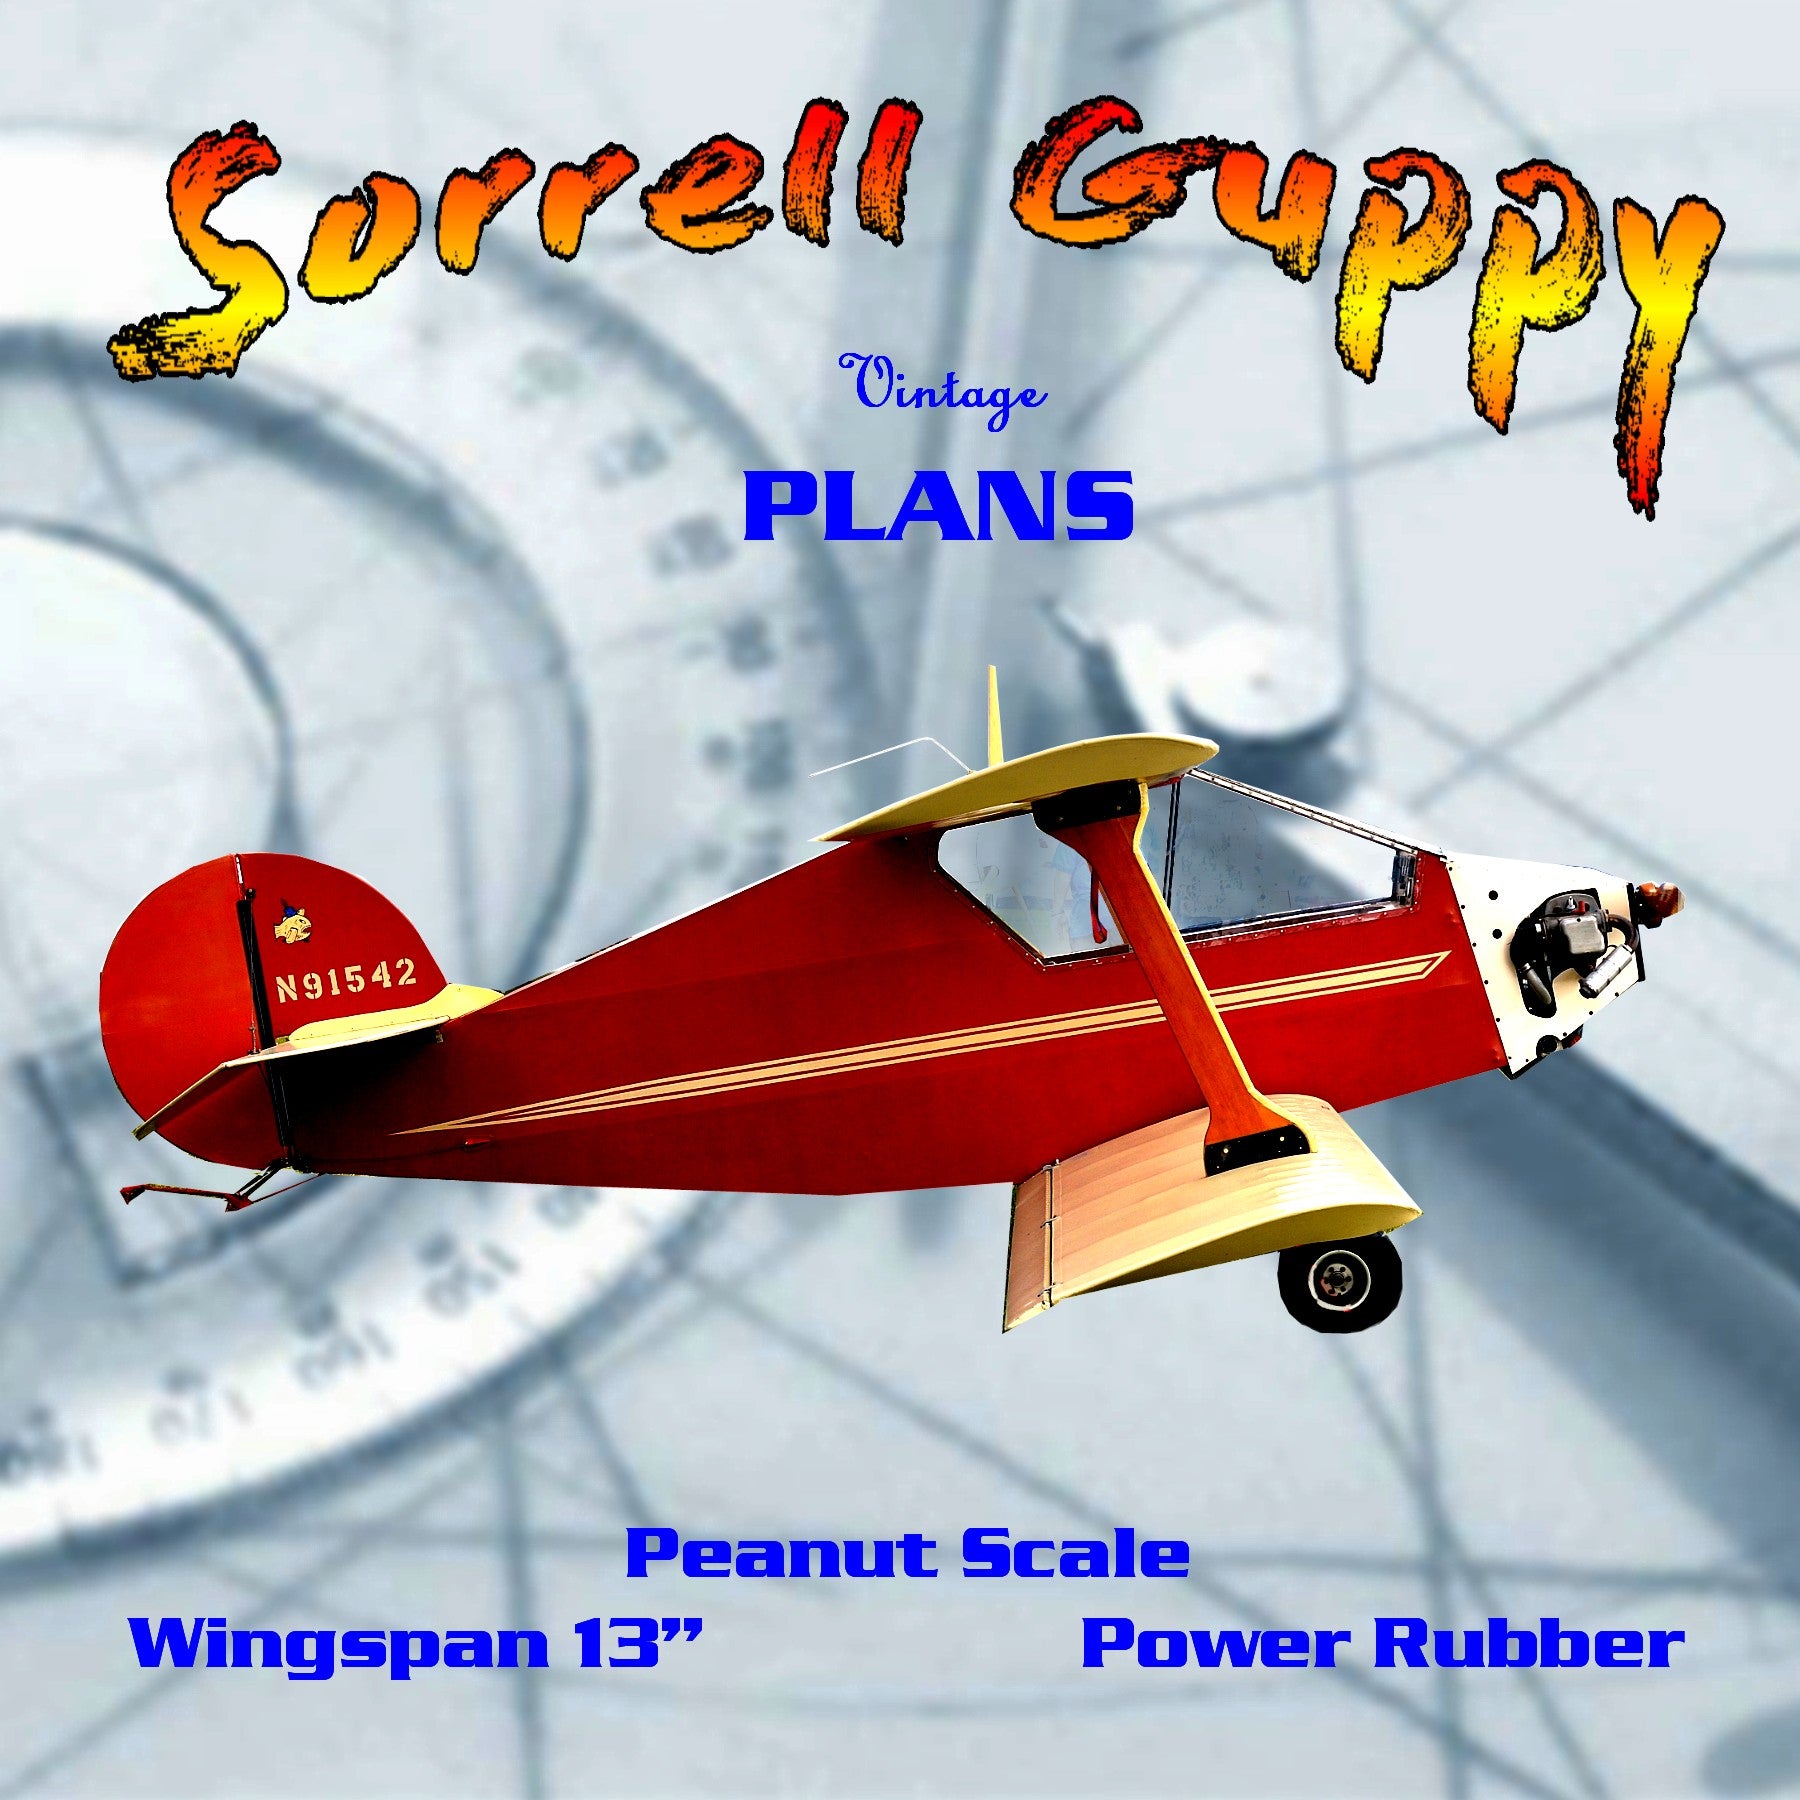 full size printed plans peanut scale "sorrell guppy" construction is ultra-simple and duplicates the original